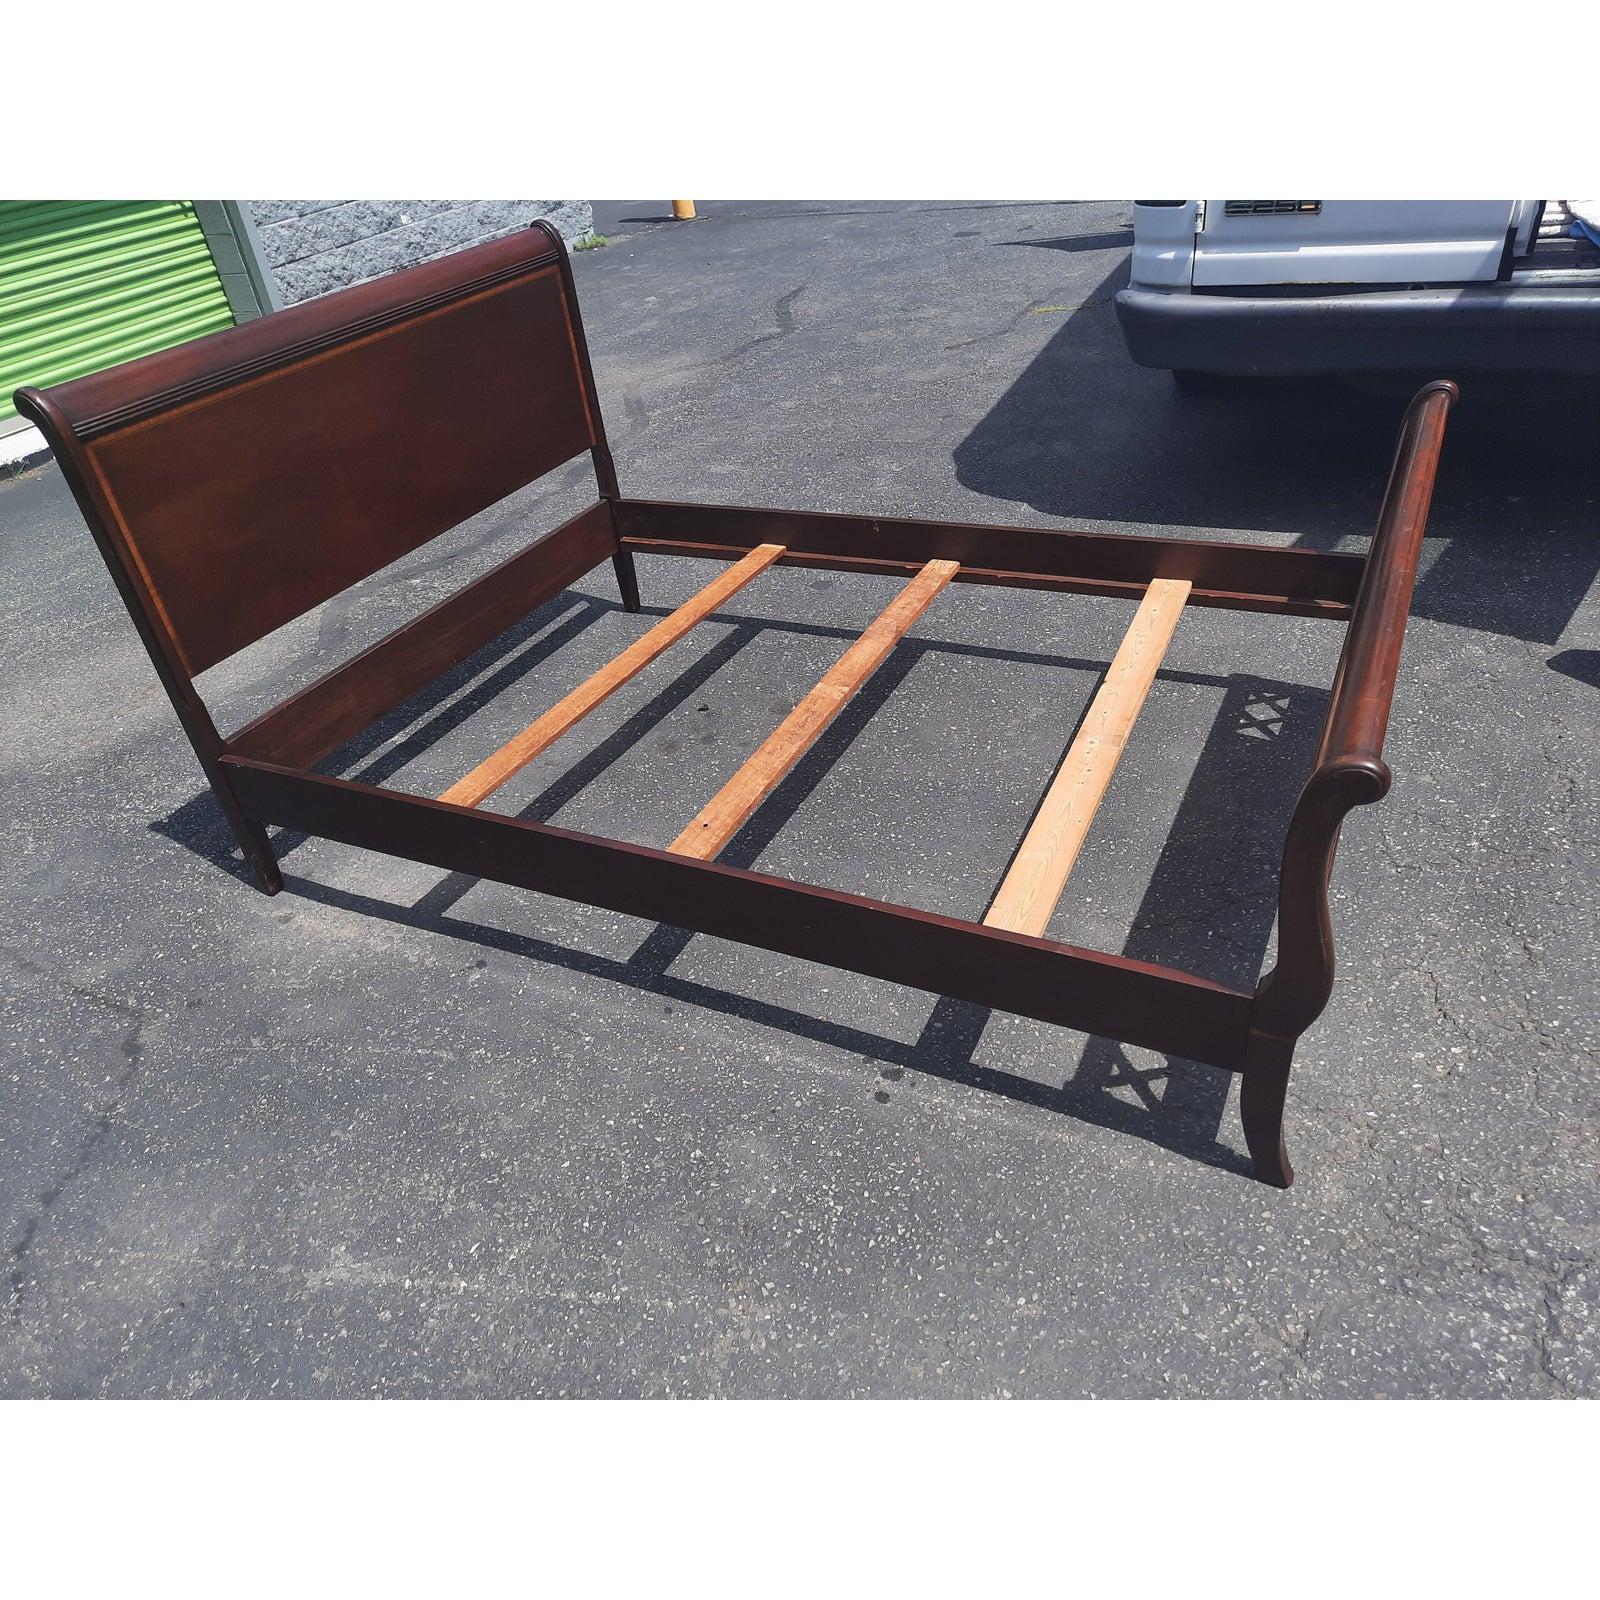 Johnson Furniture Mahogany Banded Queen Sleigh Bedframe 4